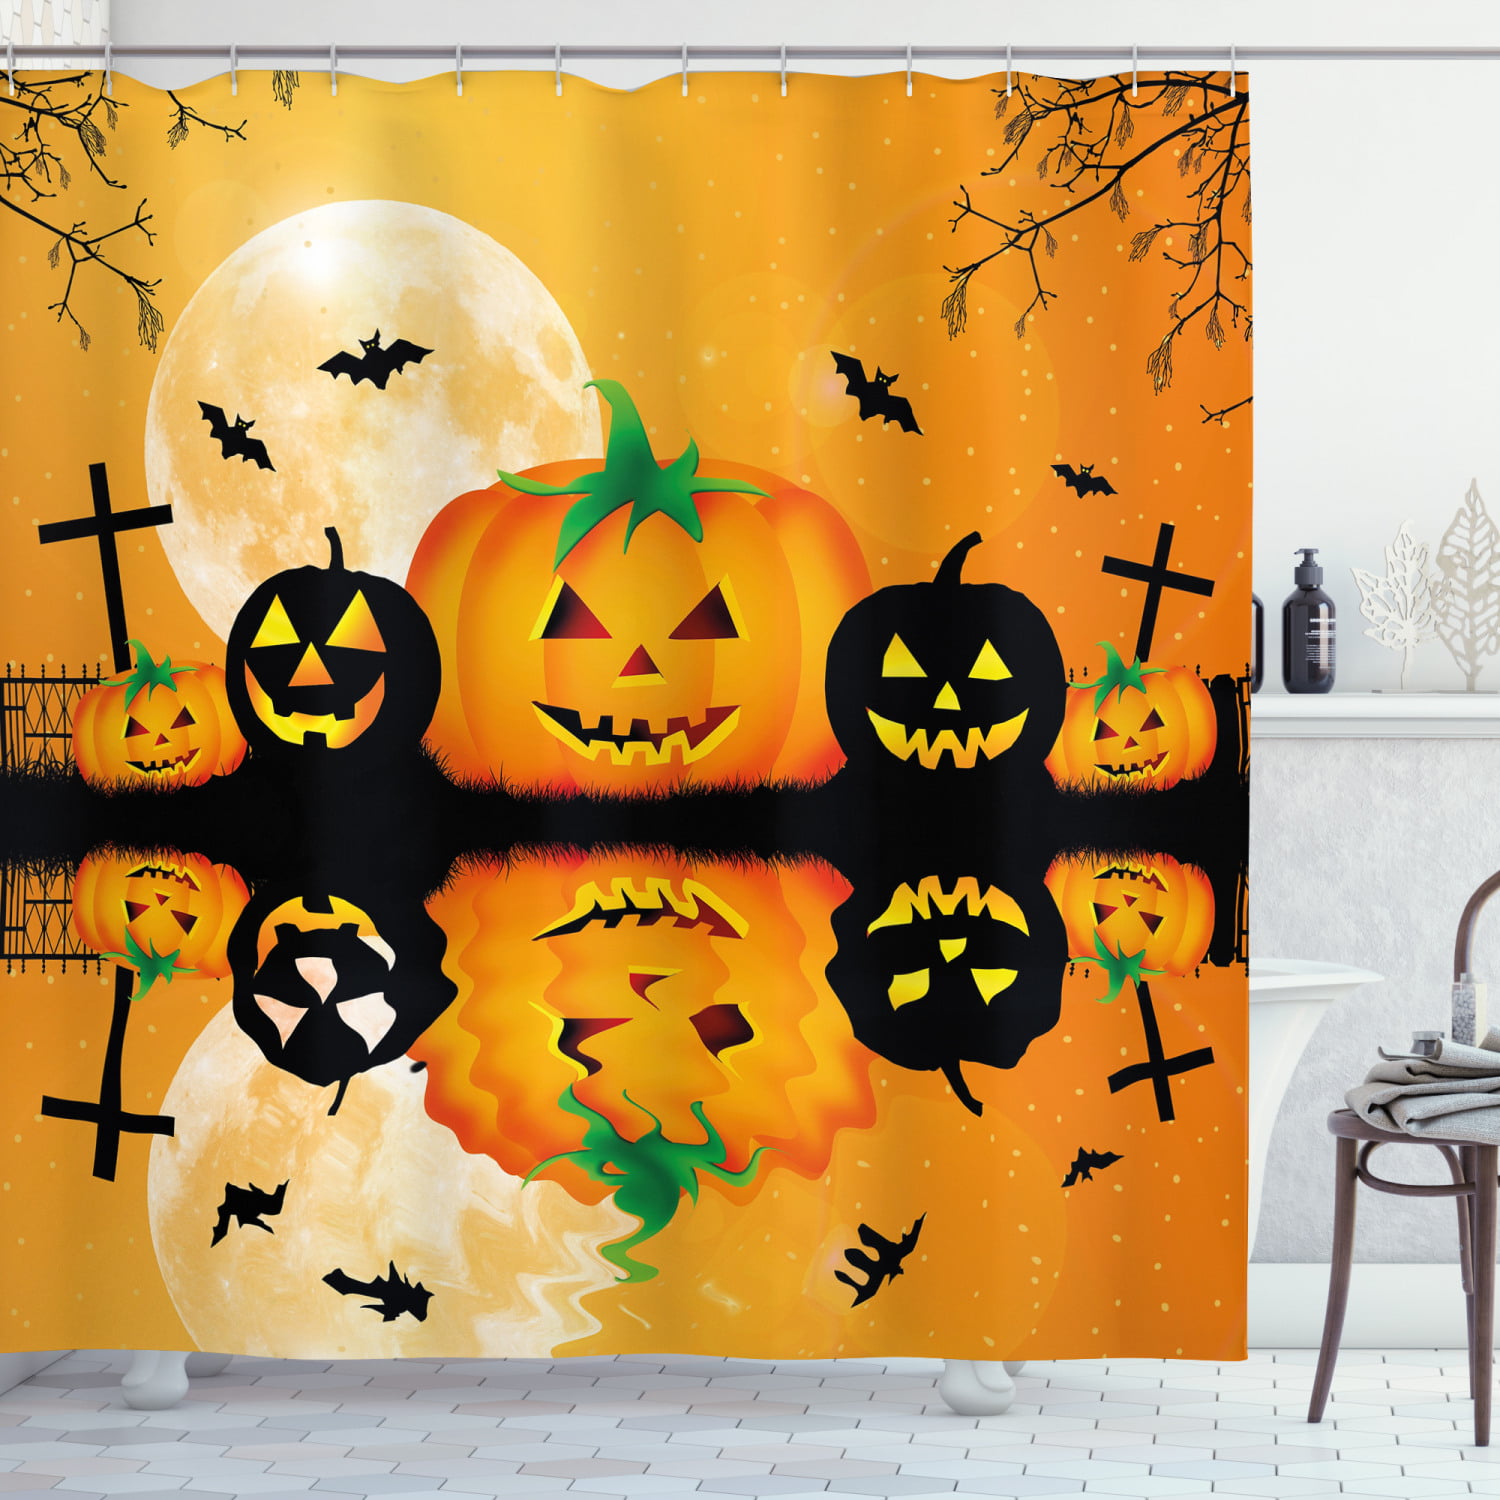 Avanti Linens Halloween Shower Curtain Black Cats and Pumpkins Design 72 x 72 Inches Polyester Fabric Standard Size 